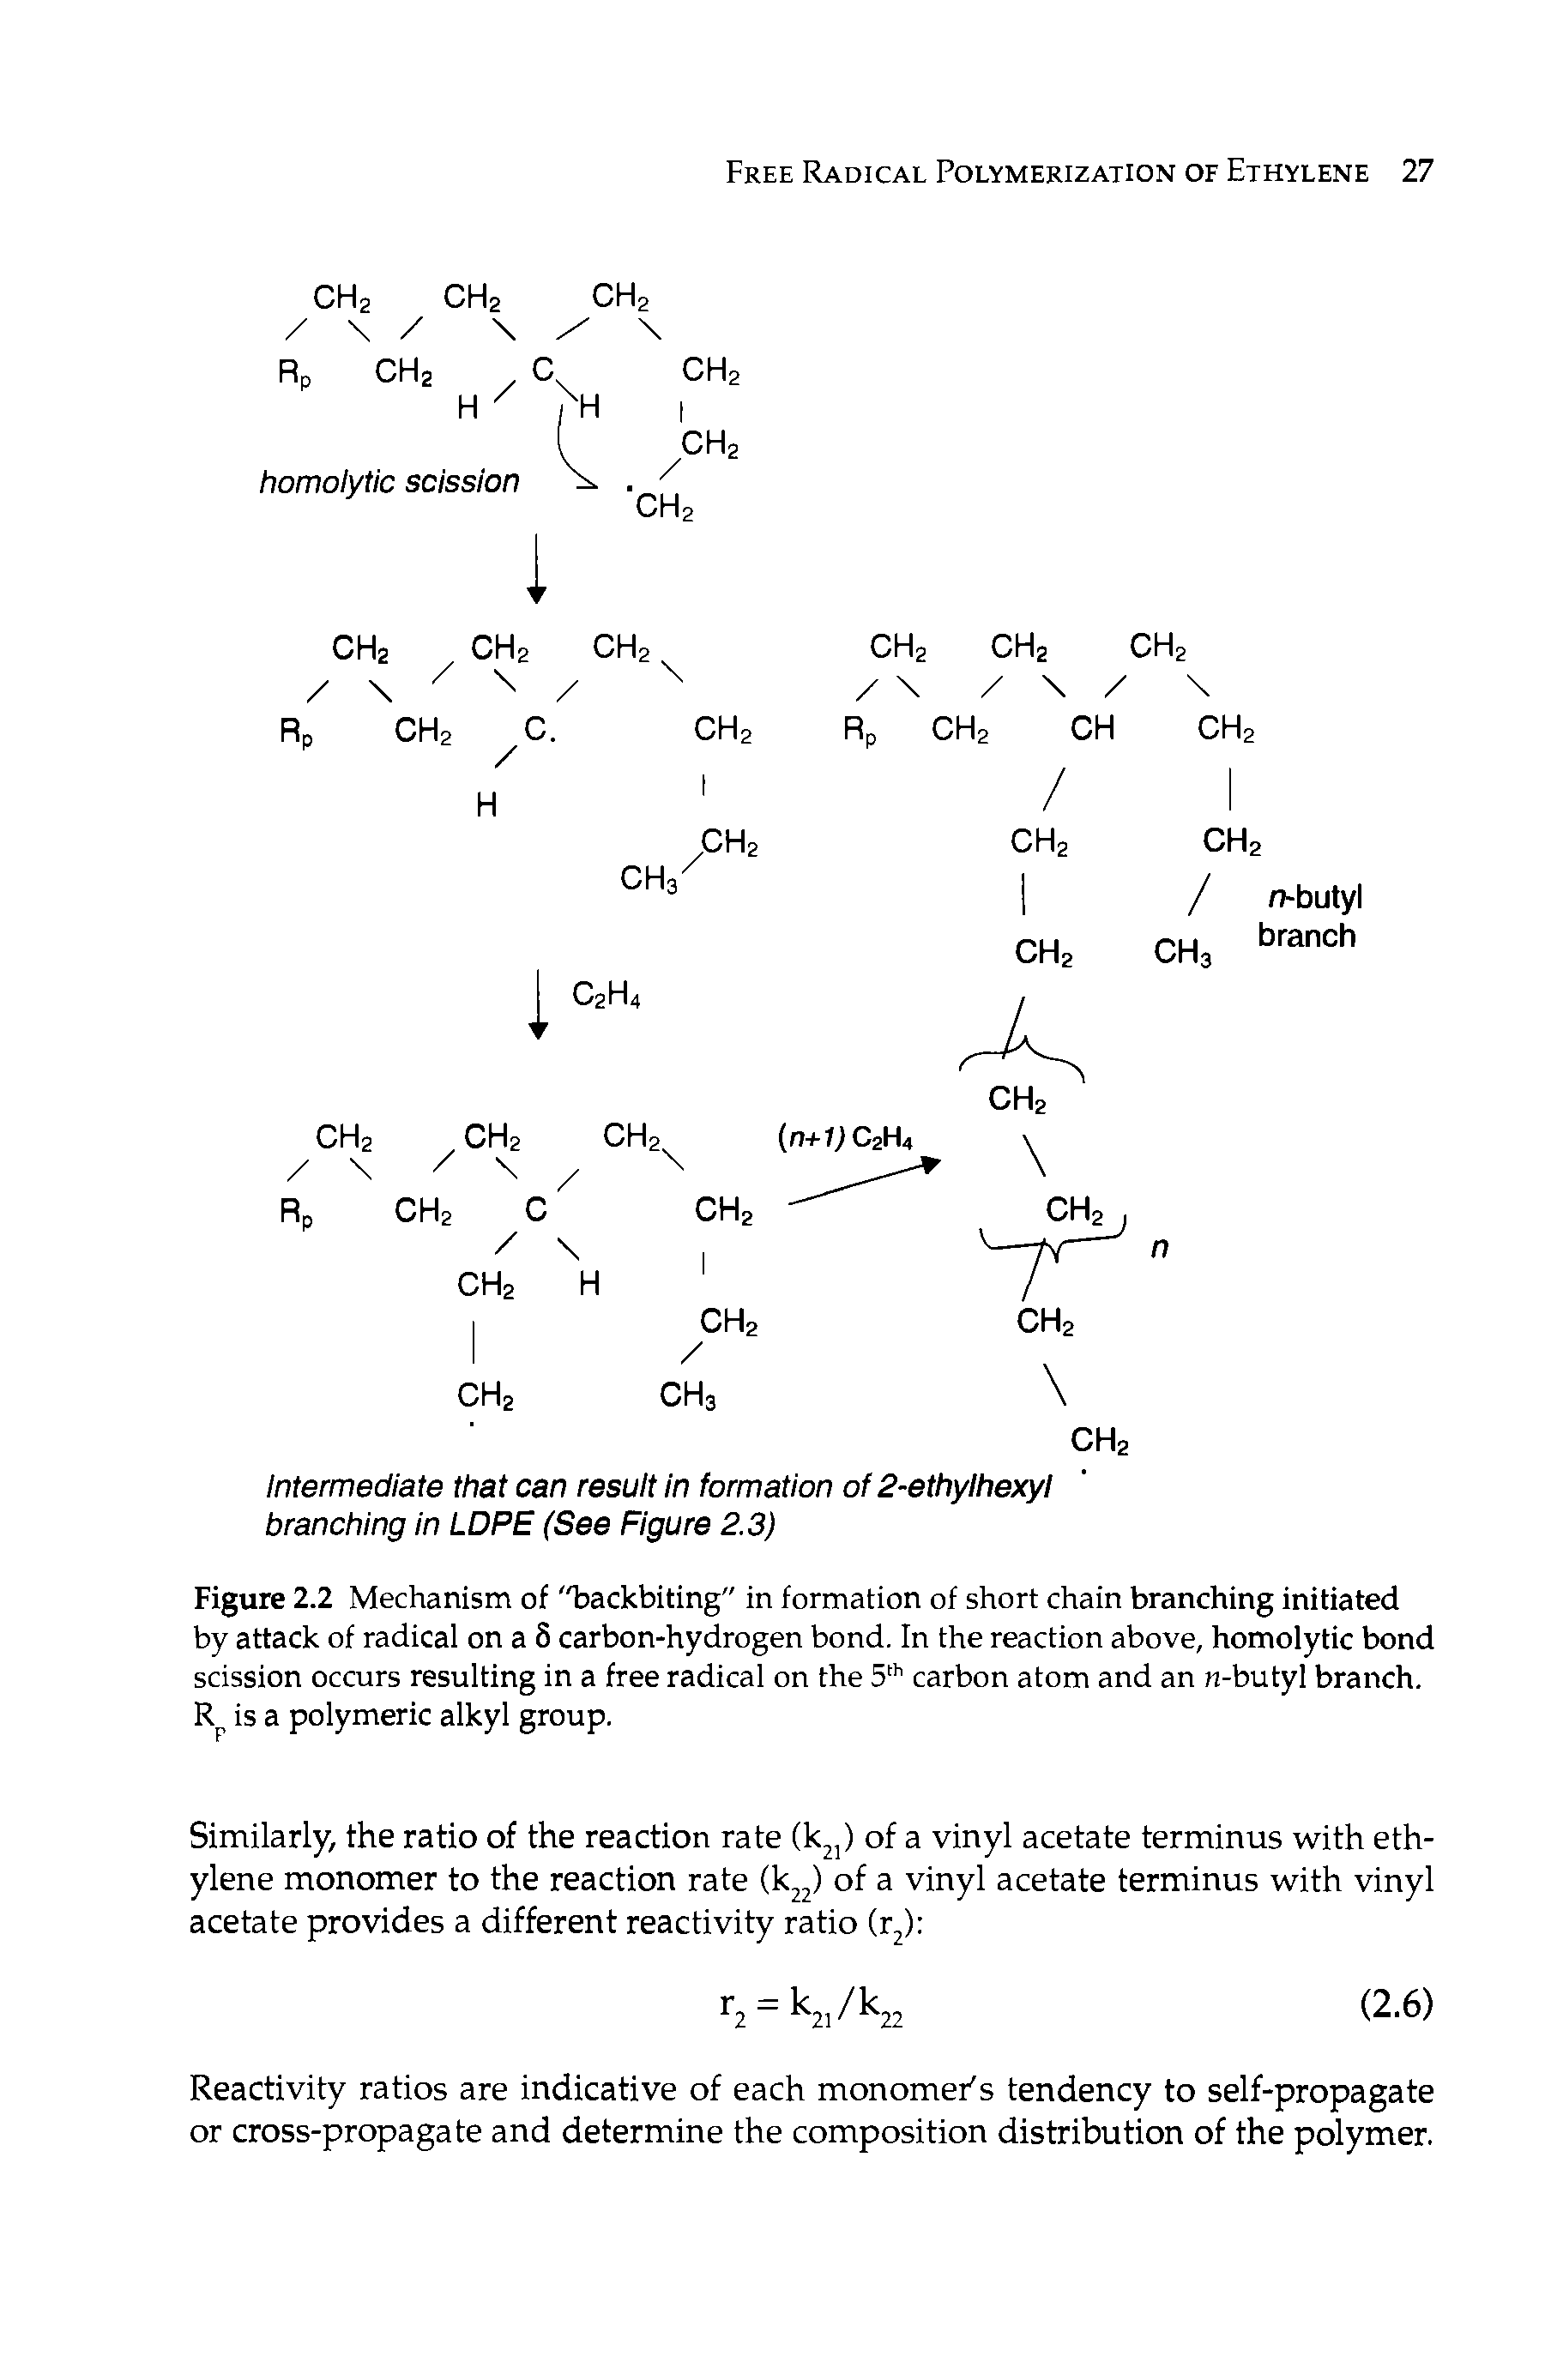 Figure 2.2 Mechanism of "backbiting" in formation of short chain branching initiated by attack of radical on a 5 carbon-hydrogen bond. In the reaction above, homolytic bond scission occurs resulting in a free radical on the 5 carbon atom and an n-butyl branch. R is a polymeric alkyl group.